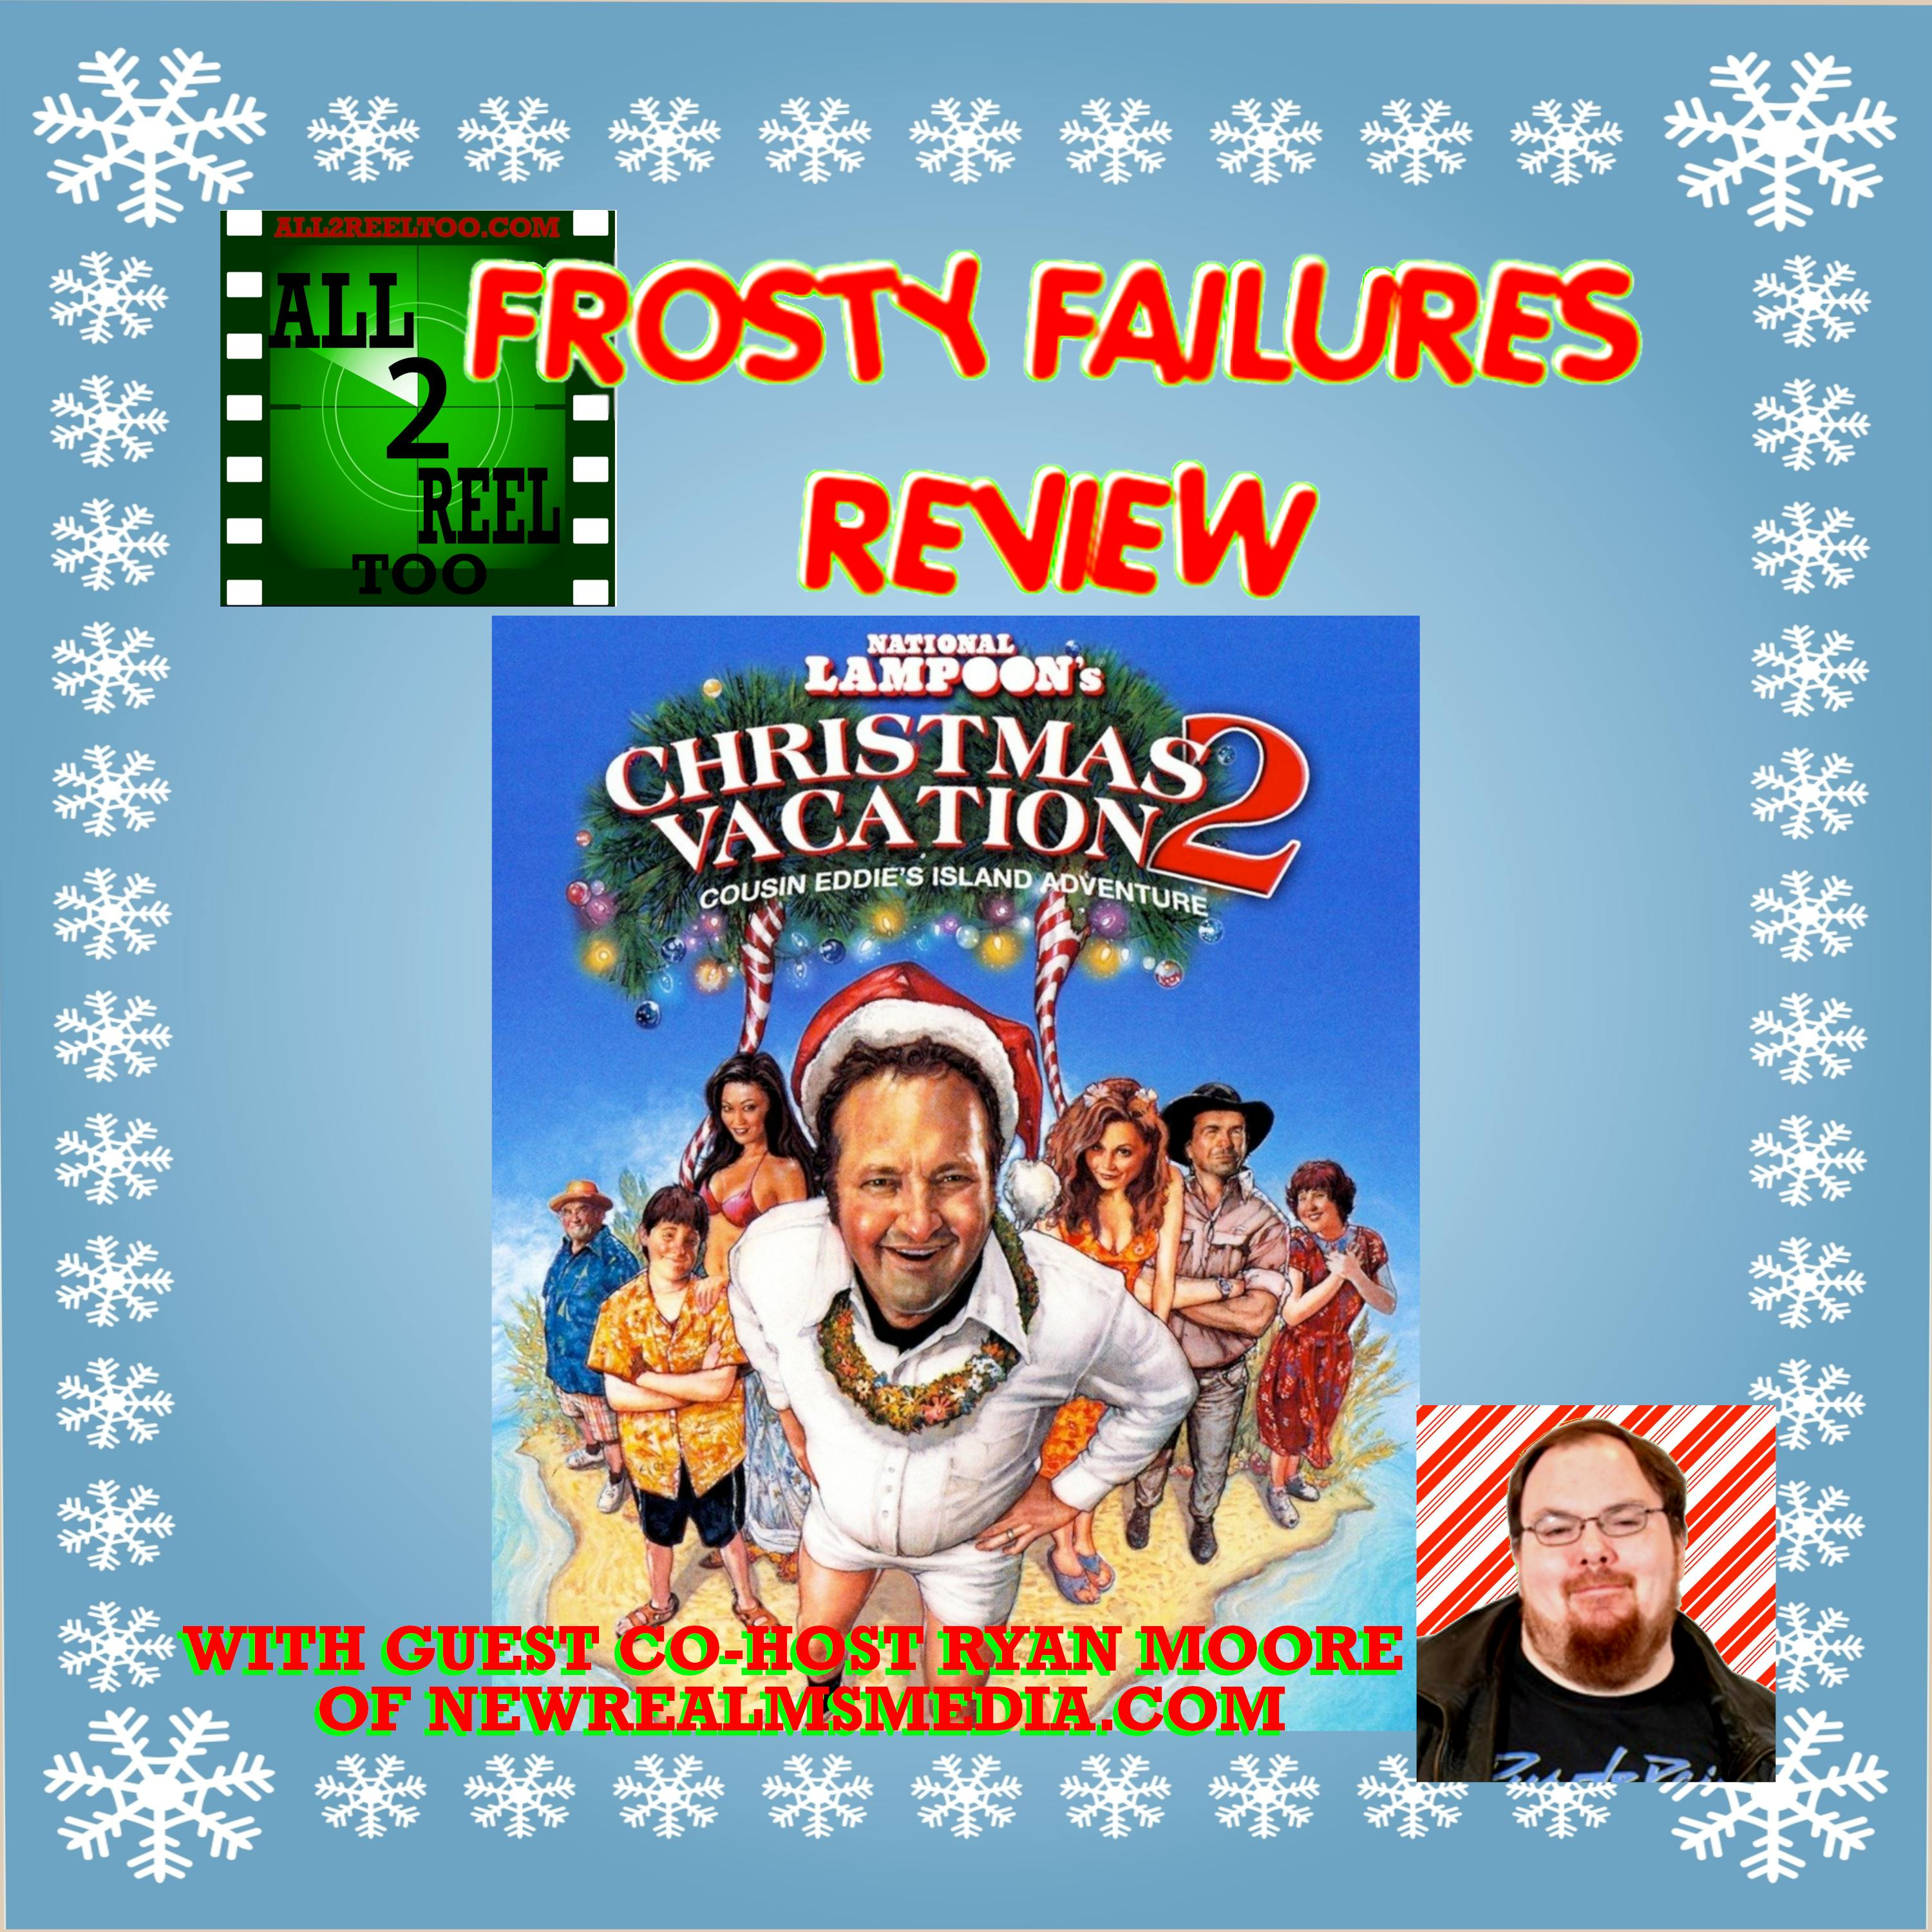 National Lampoon’s Christmas Vacation 2: Cousin Eddie’s Island Adventure (2003)  - FROSTY FAILURES REVIEW